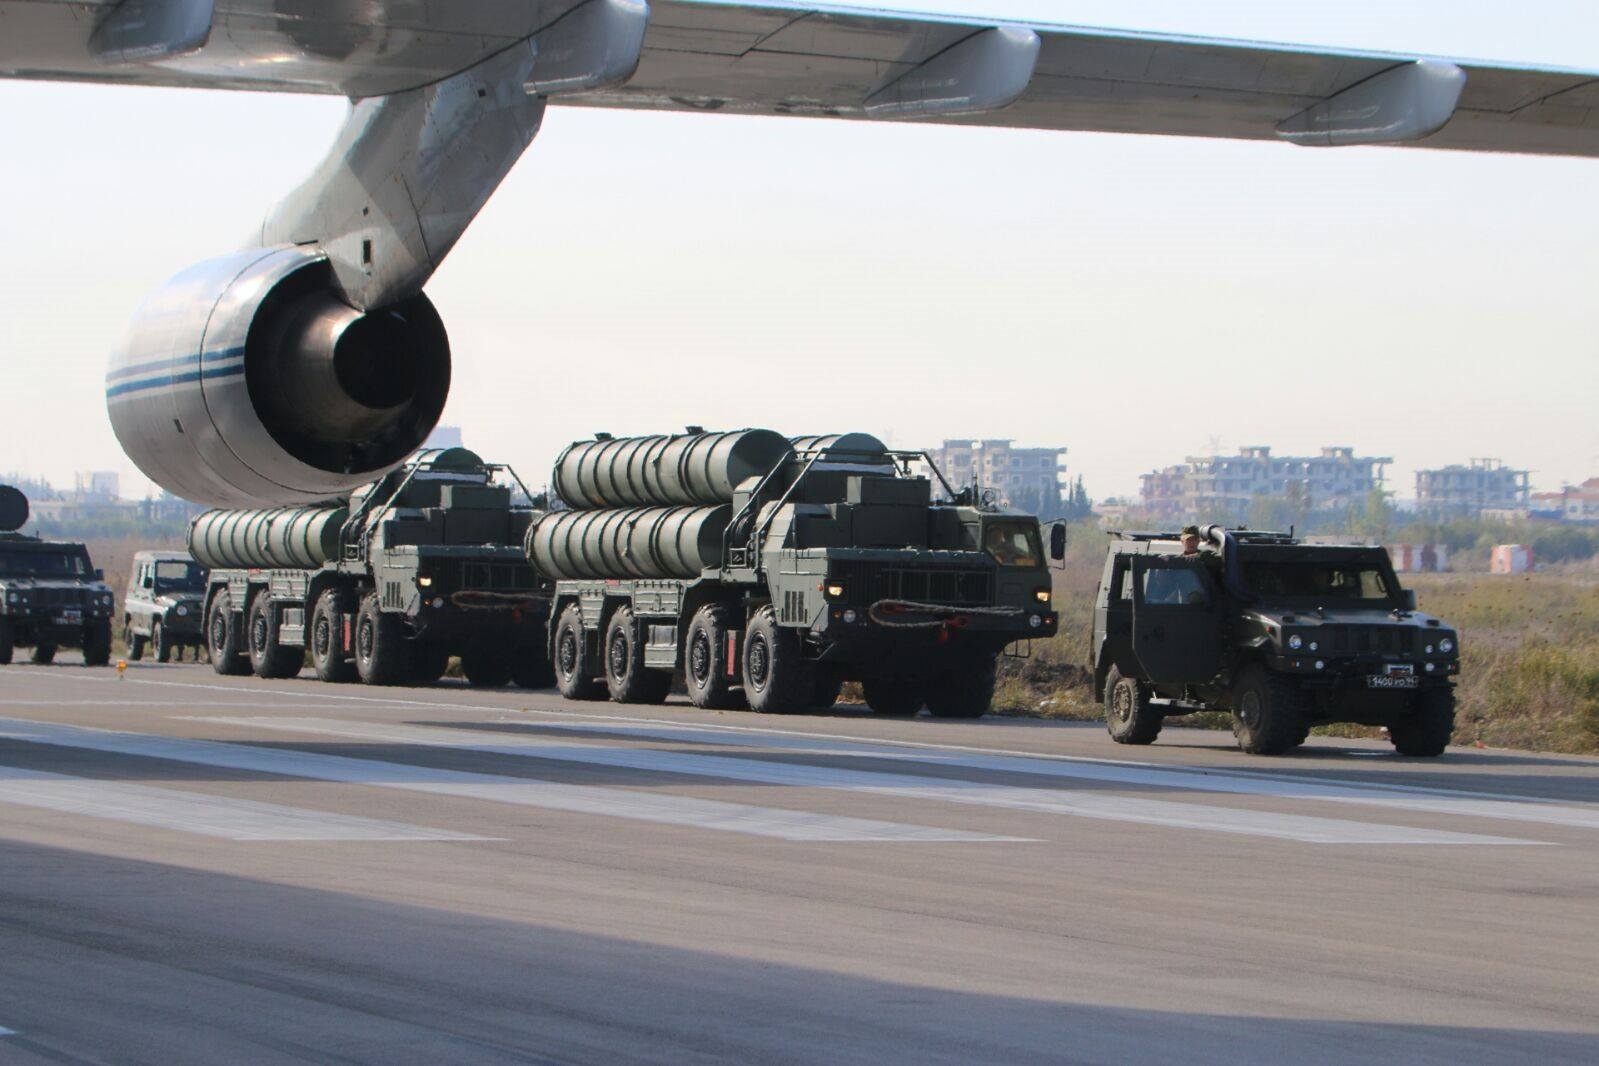 Turkey and the US have sparred over Ankara’s S-400 purchase (AFP/Russian Defence Ministry)